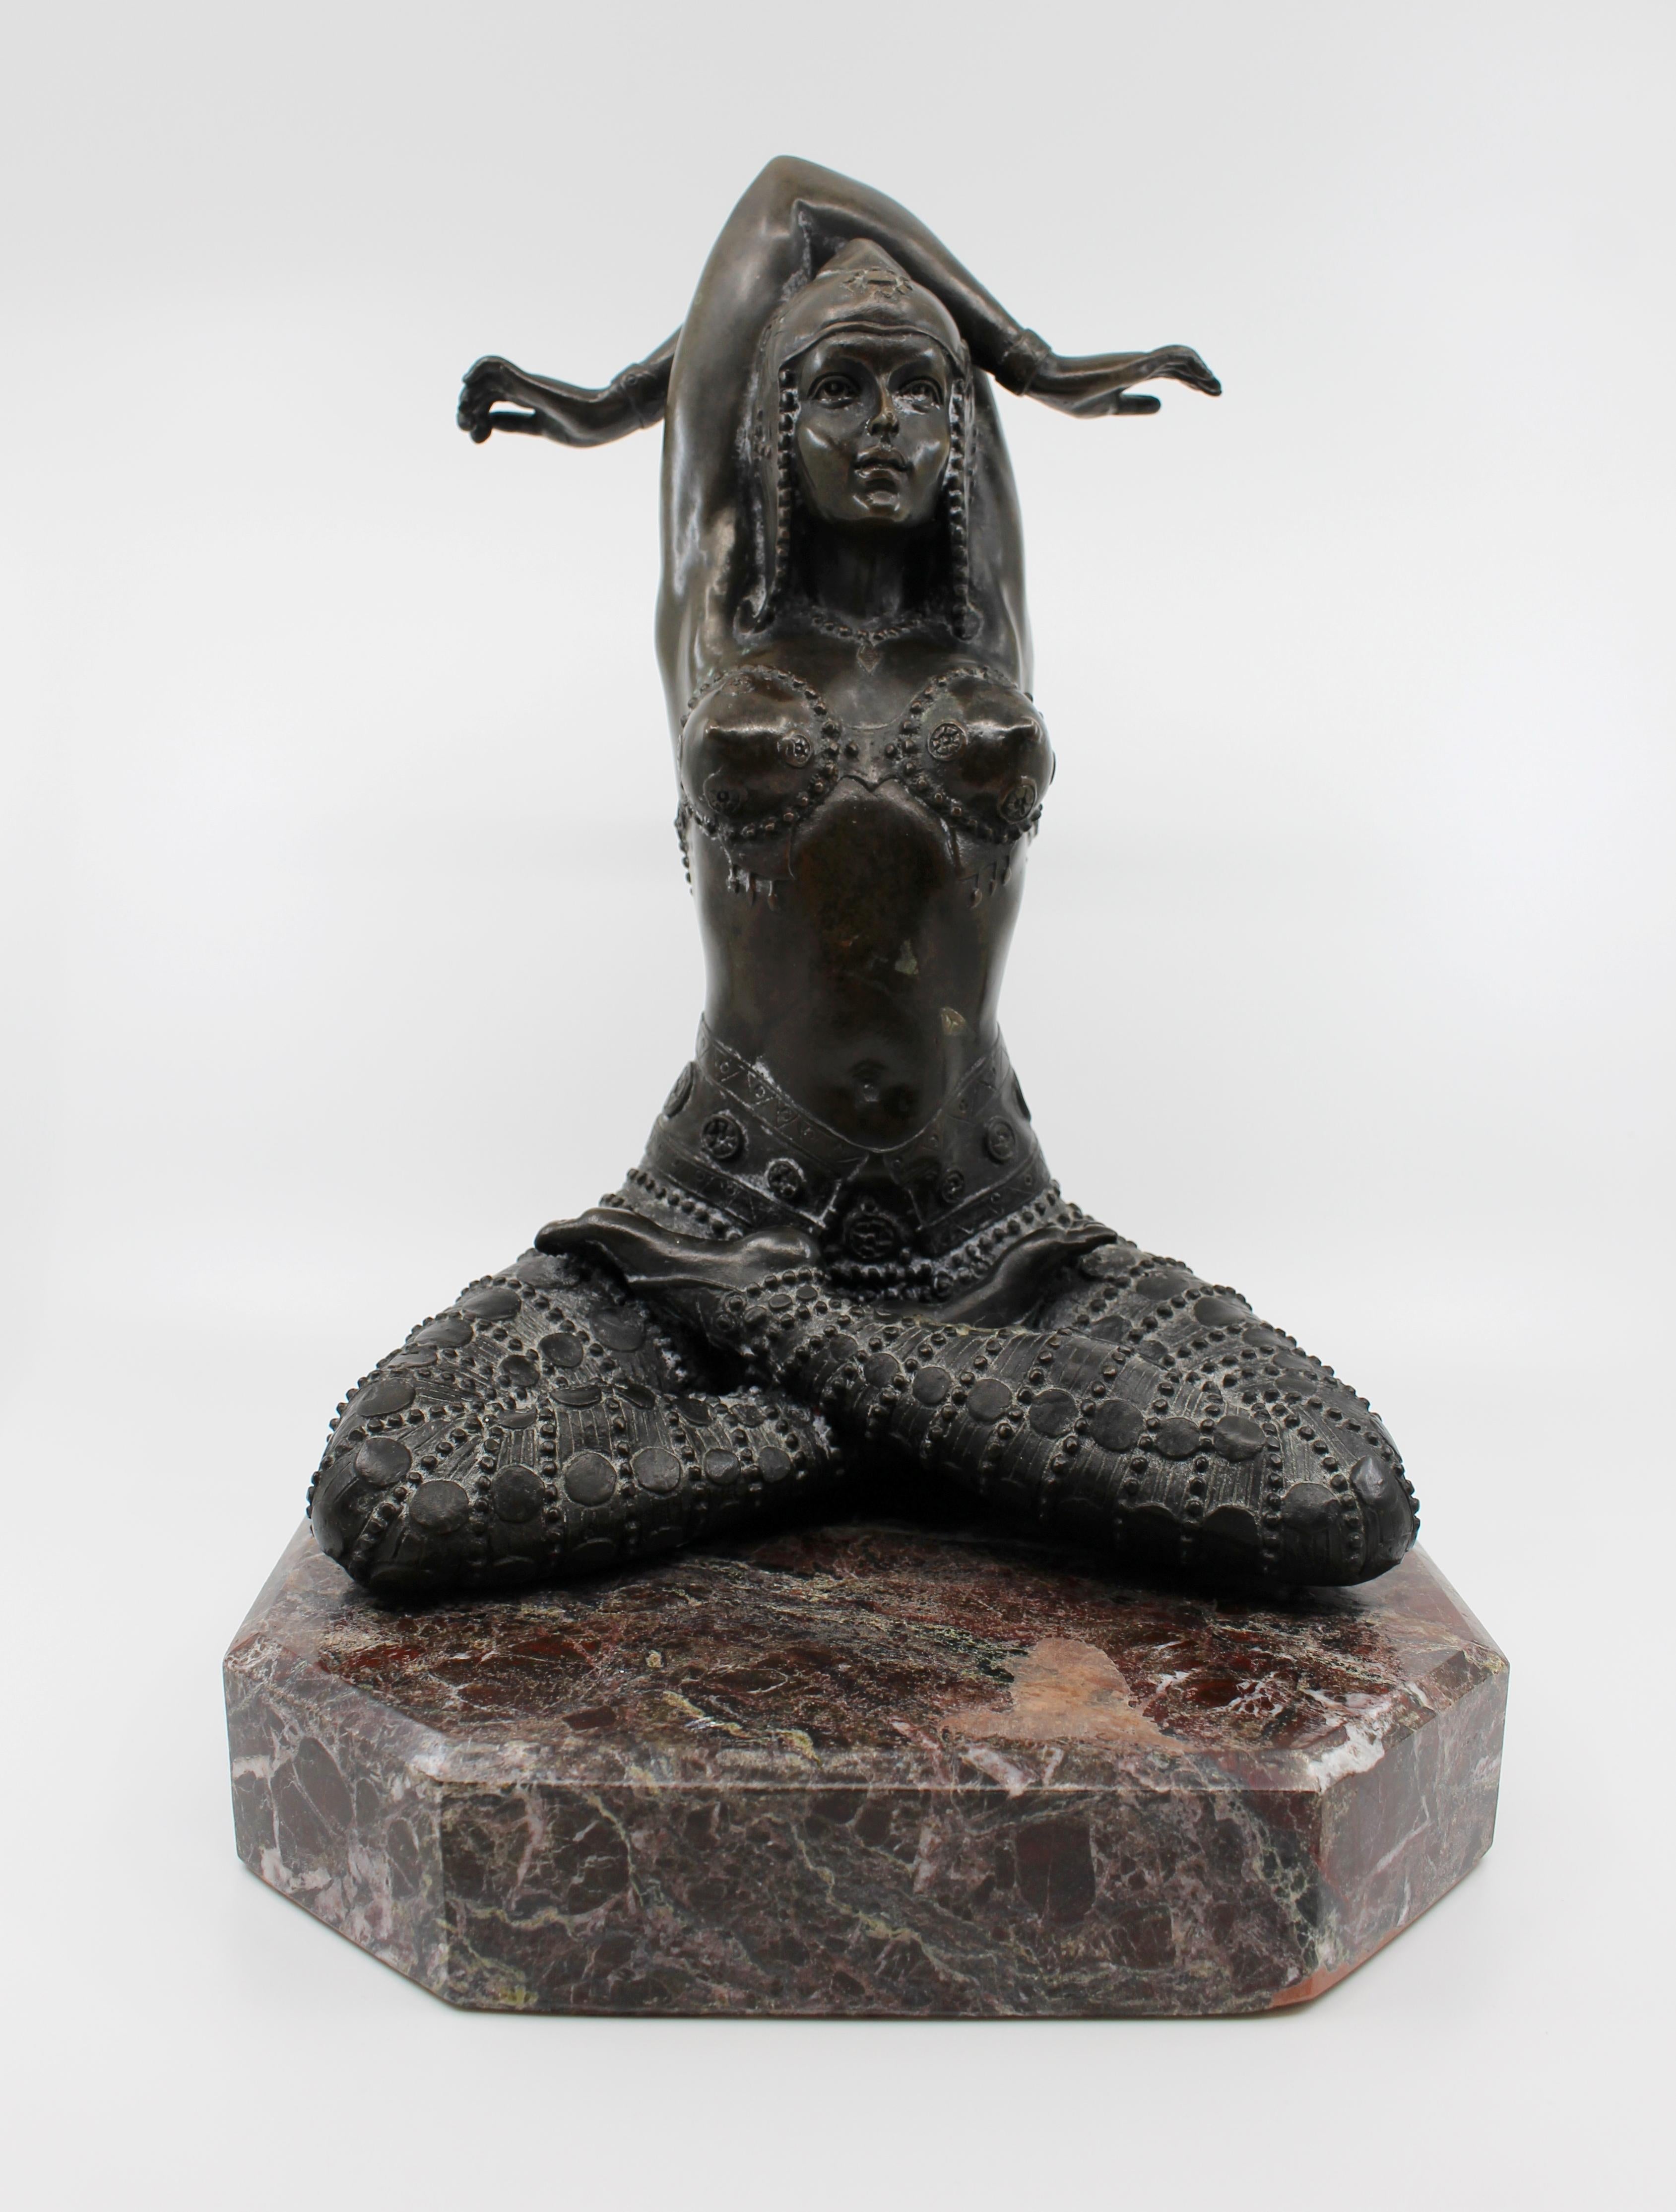 Period mid-late 20th century, Art Deco style
Composition Bronze sculpture on rouge marble base
Measures: Base 21 x 21 cm / 8 1/4 x 8 1/4 in
Height 30.5 cm / 12 in
Condition Very good condition, minor wear to base commensurate with